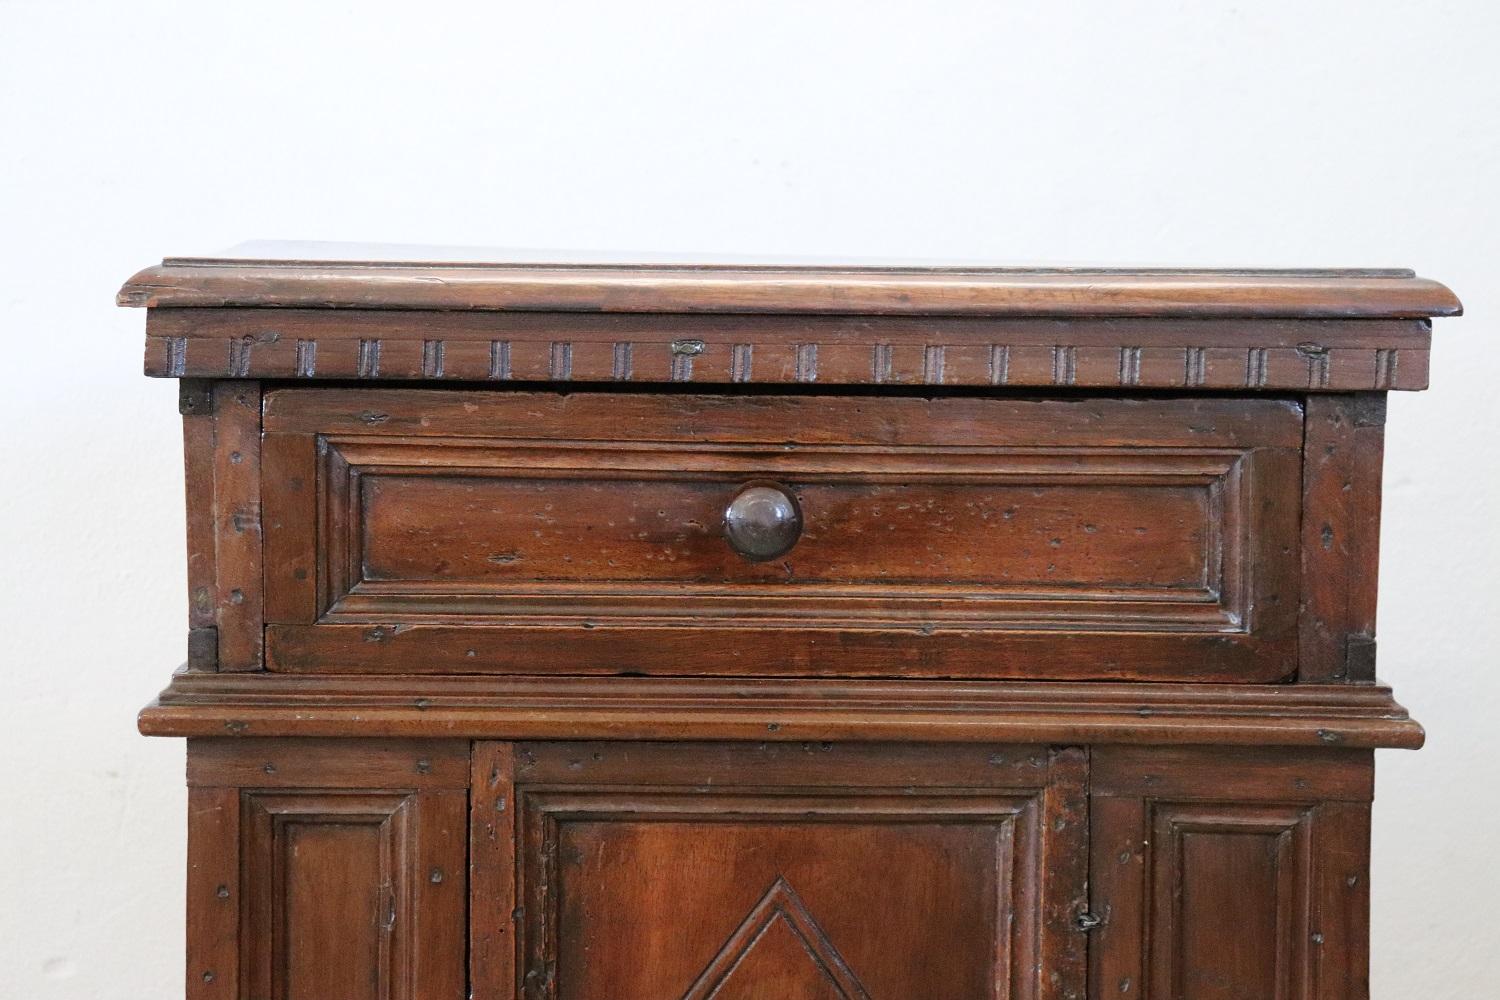 Rare and fine quality Italian Tuscany 1680s antique nightstand in carved solid walnut. On the front one comfortable drawer. Geometric decorations on the door panels and sides. Original back and nails. In antique good conditions.